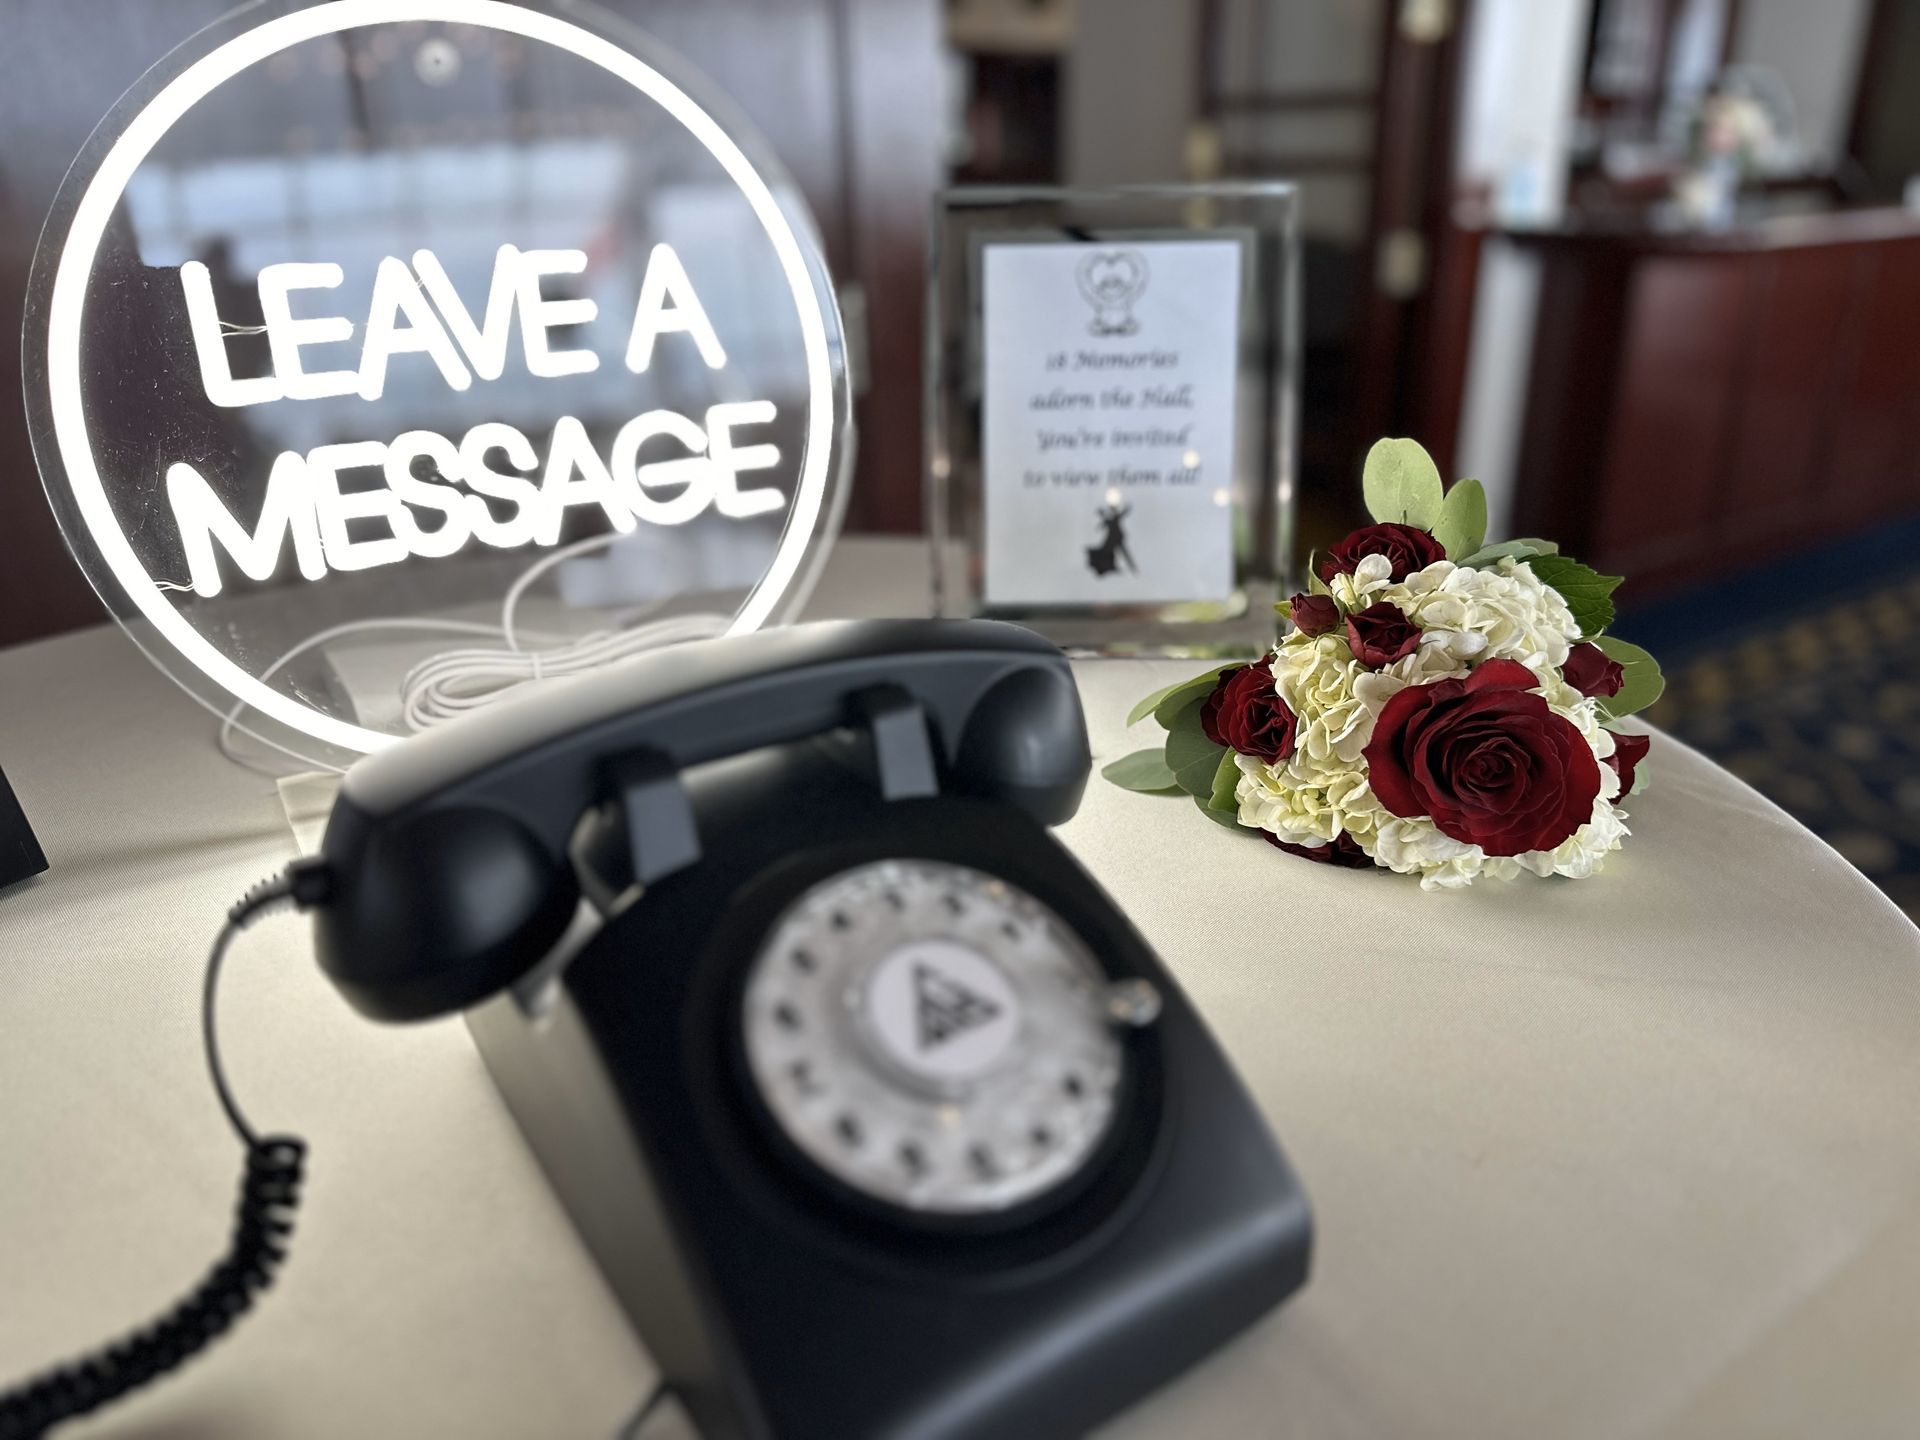 A black telephone is sitting on a table next to a sign that says leave a message.